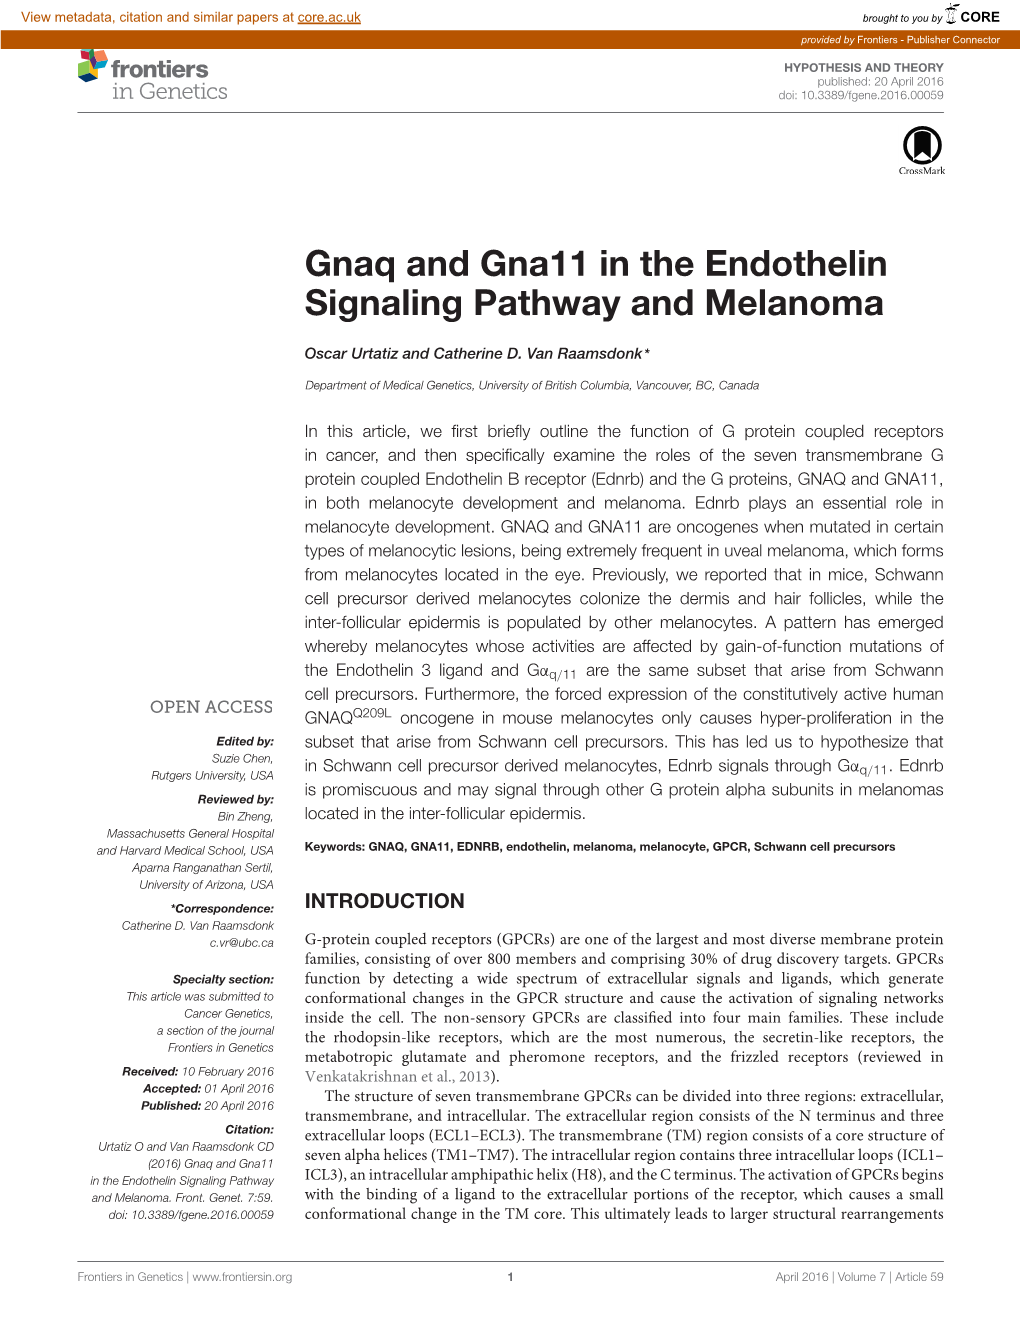 Gnaq and Gna11 in the Endothelin Signaling Pathway and Melanoma